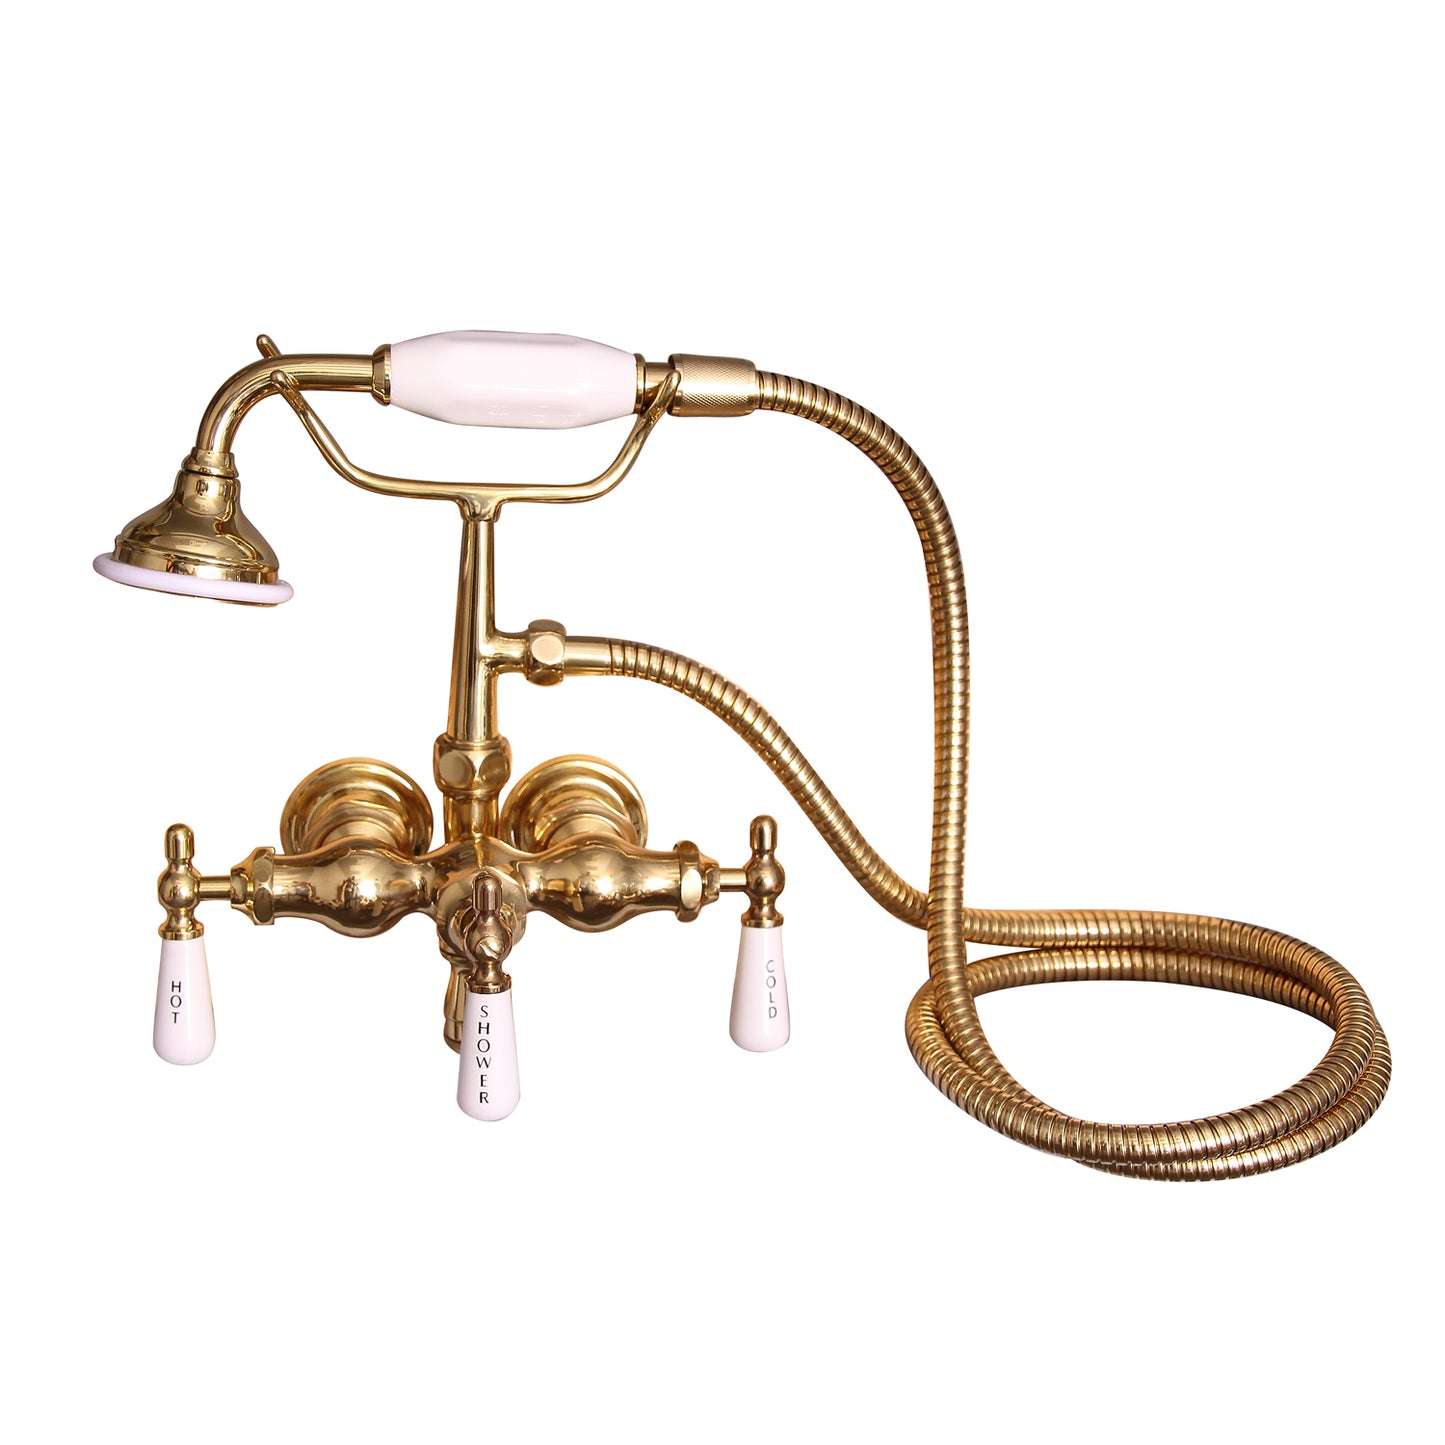 Clawfoot Tub Spigot Faucet with Hand Shower & Porcelain Lever Handles in Polished Brass